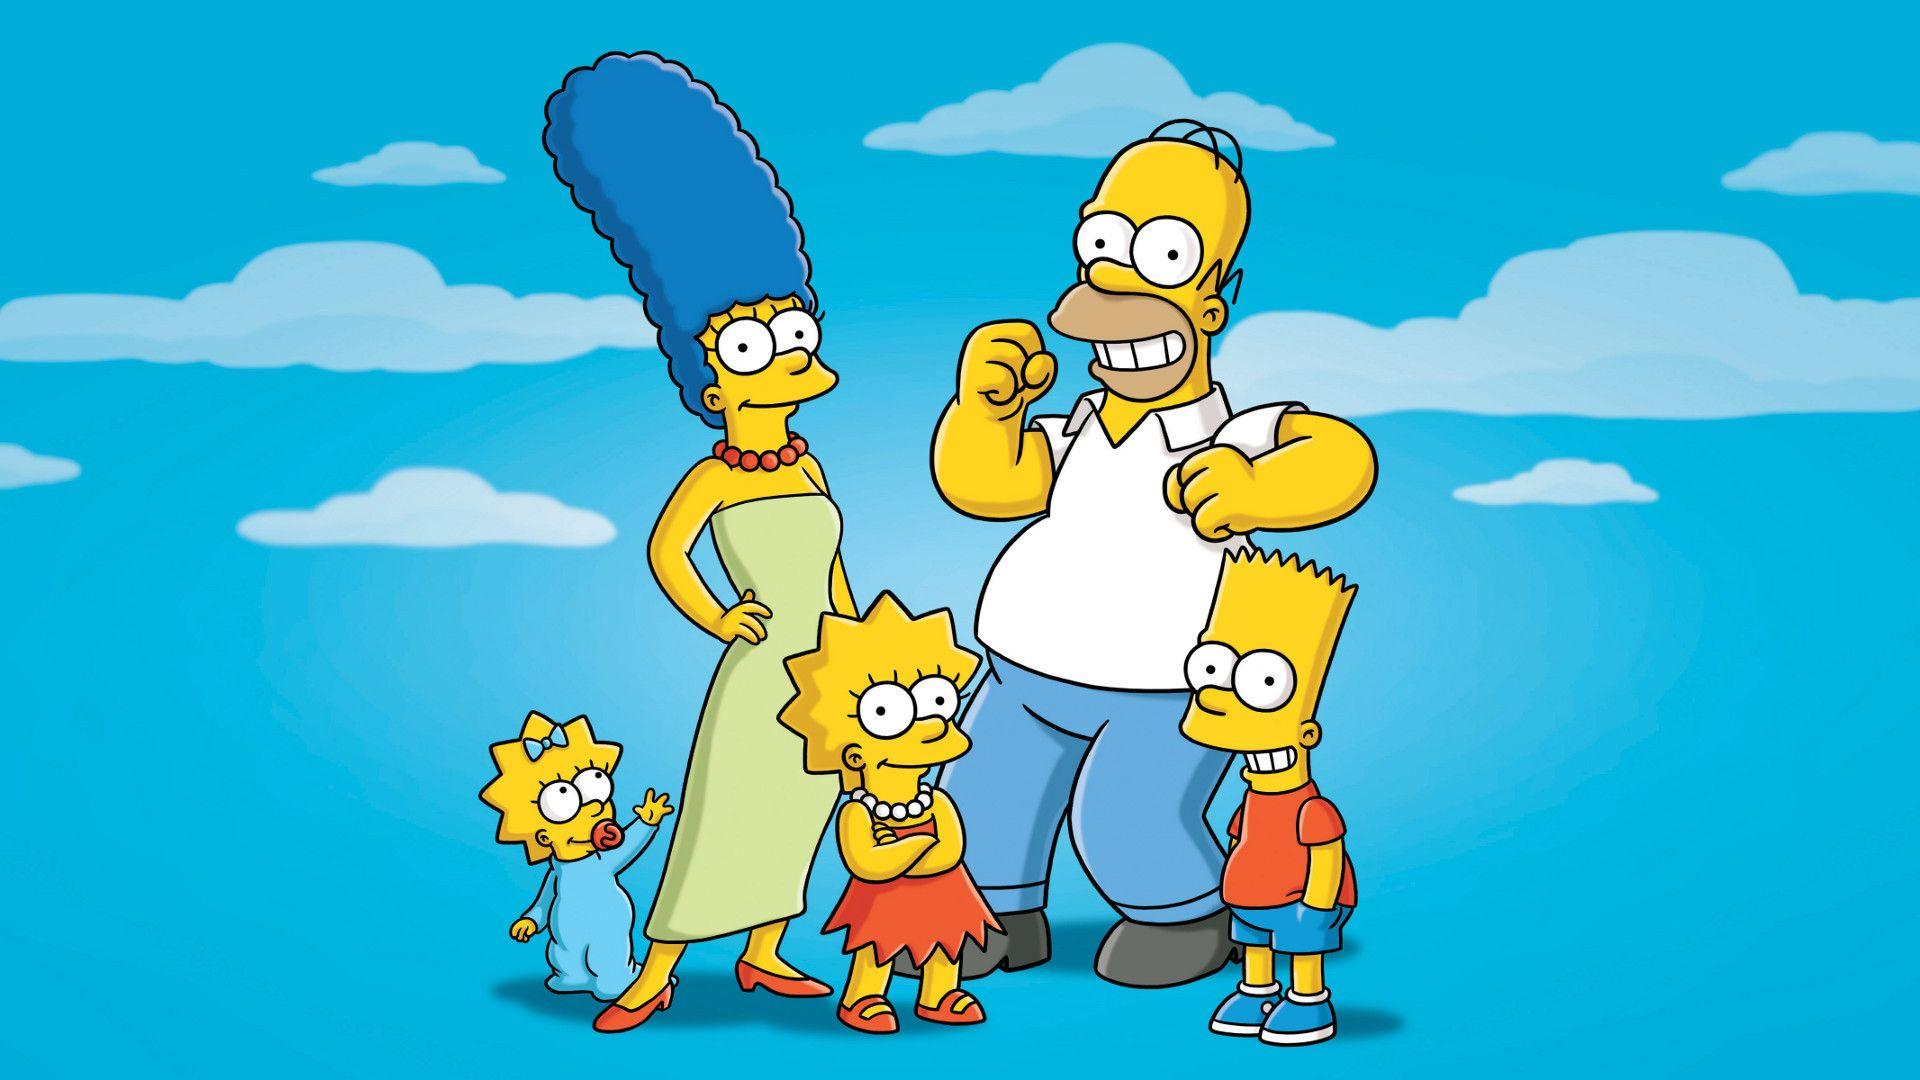 Simpsons Aesthetic Laptop Wallpapers - Top Free Simpsons Aesthetic